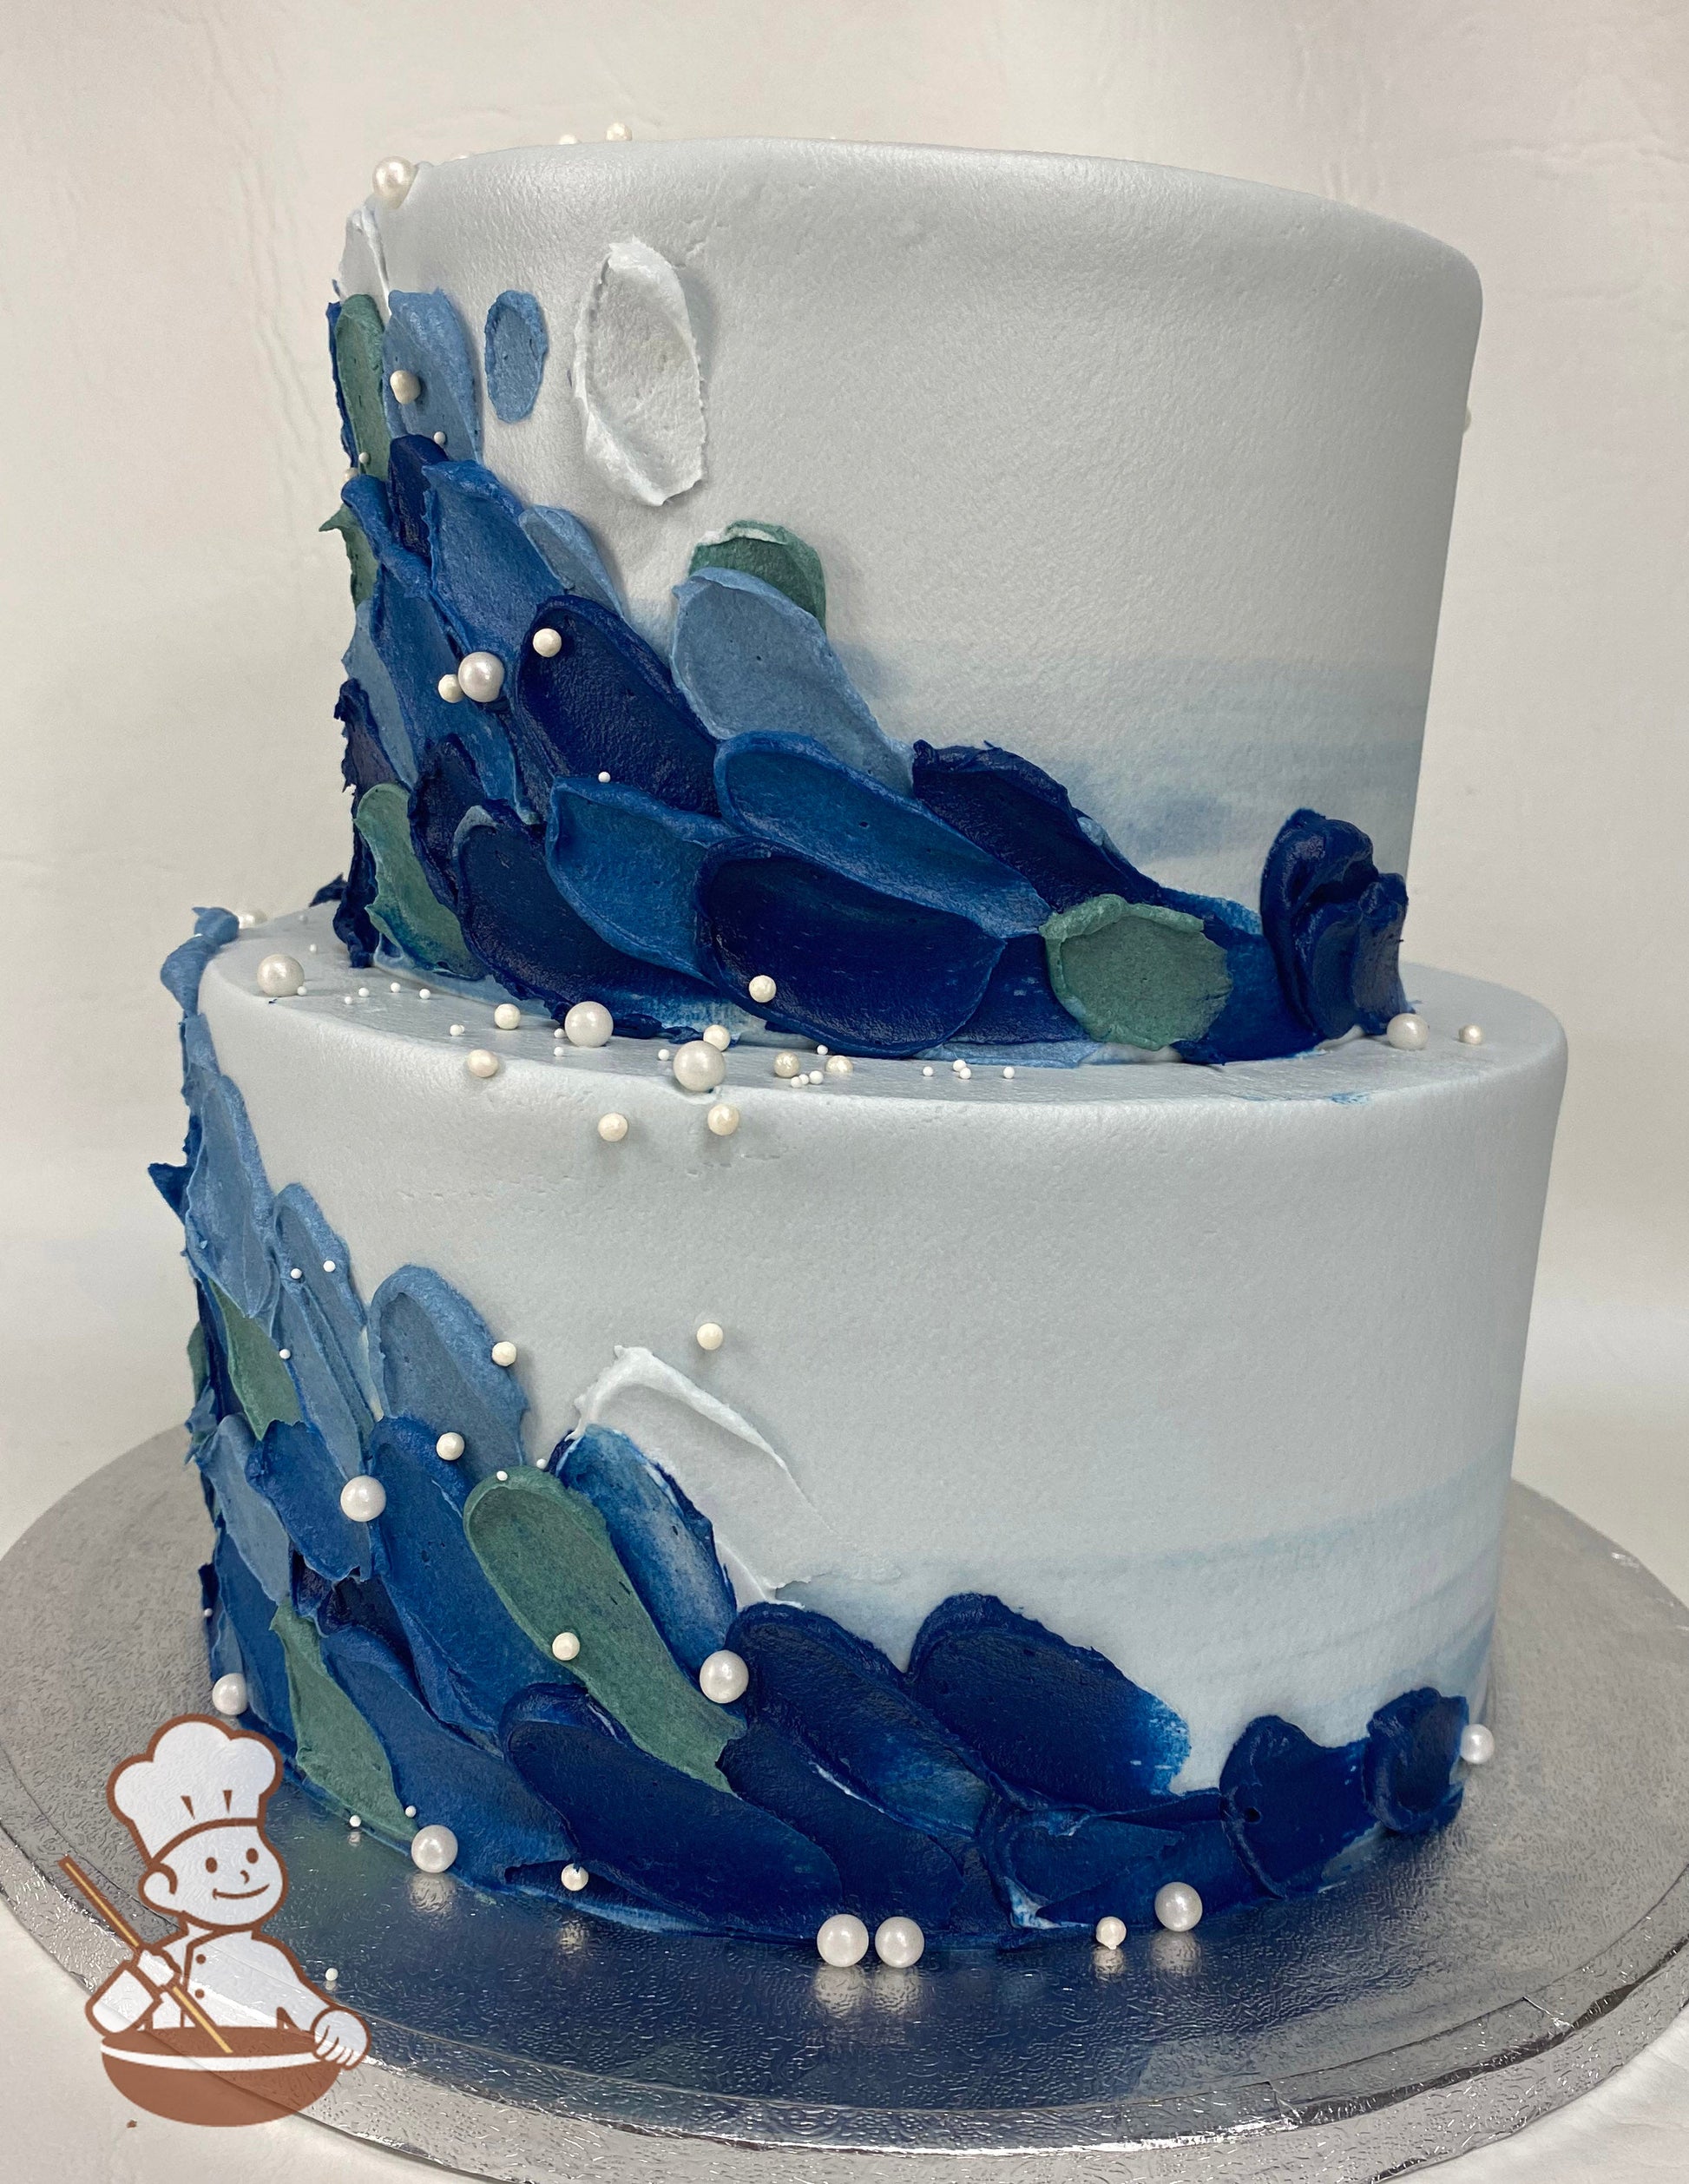 2-tier cake with a light blue watercolor icing, decorated with buttercream palette knife scales in different shades of blue and white pearls.